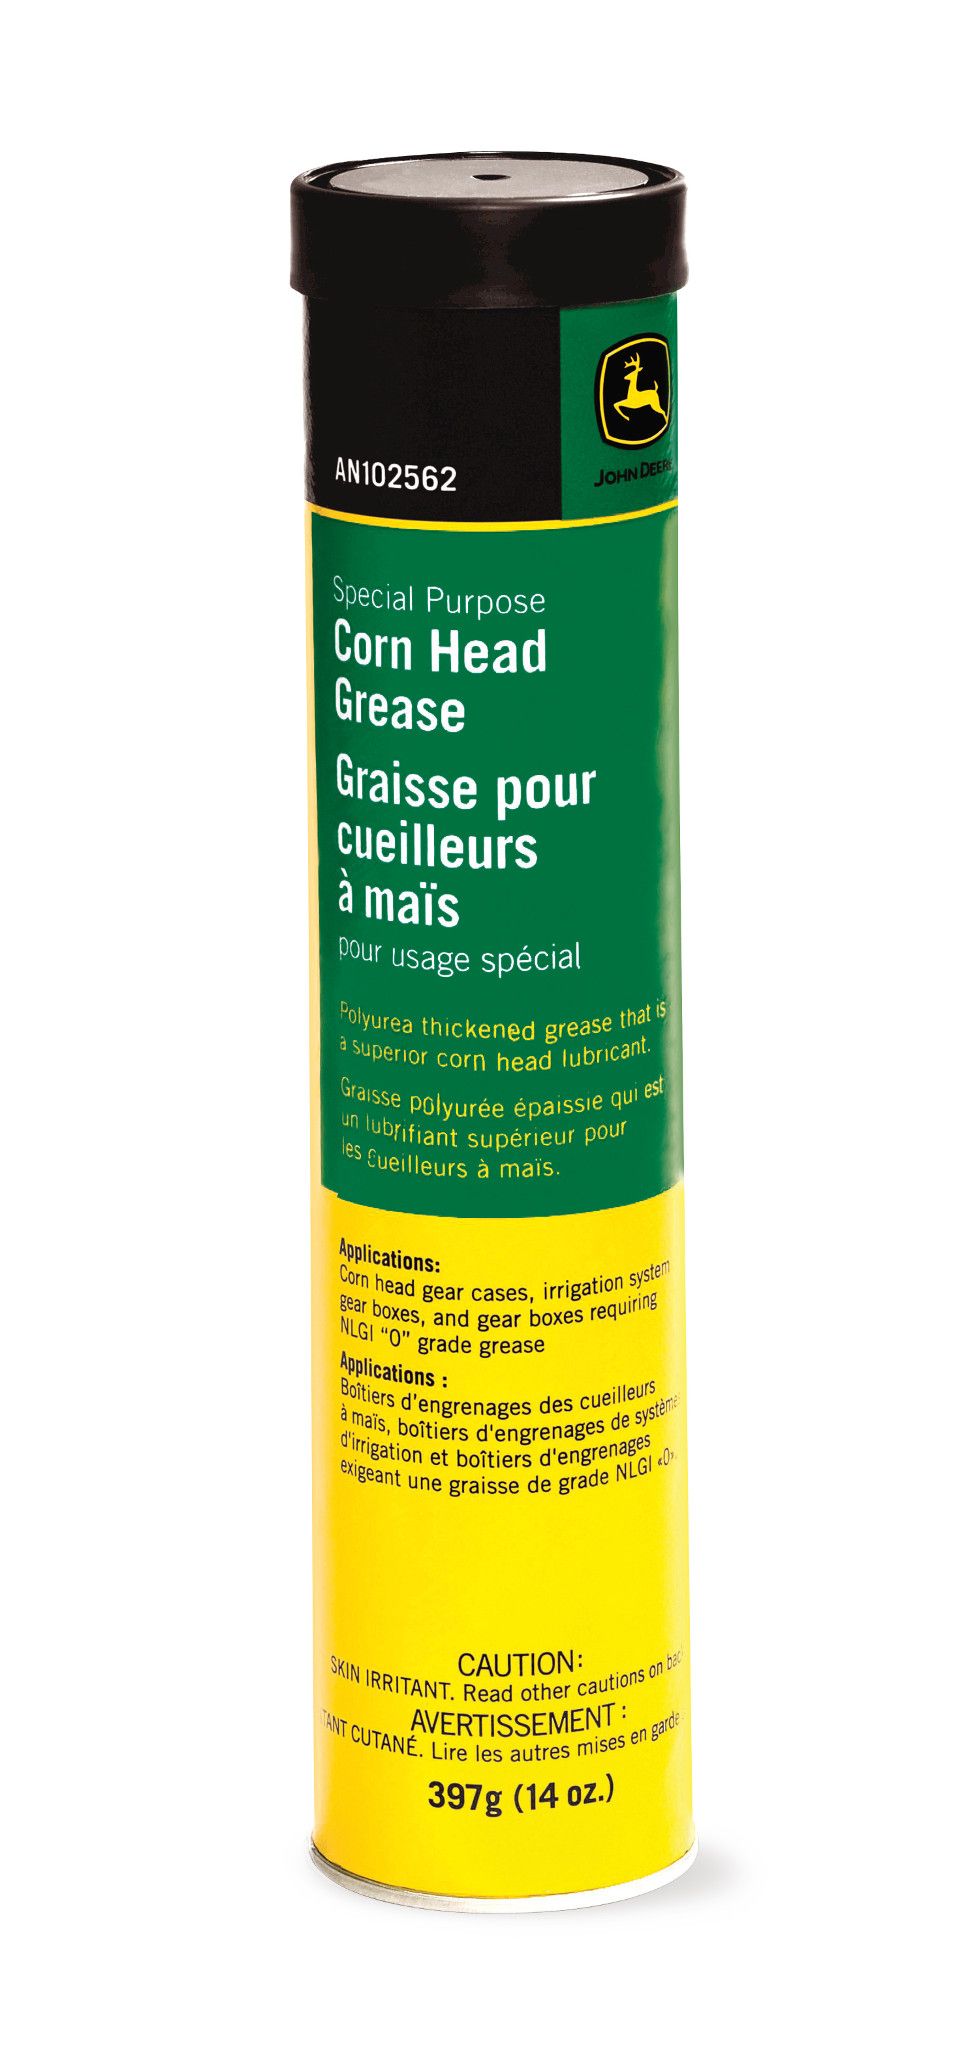 Special-Purpose Corn Head Grease - AN102562